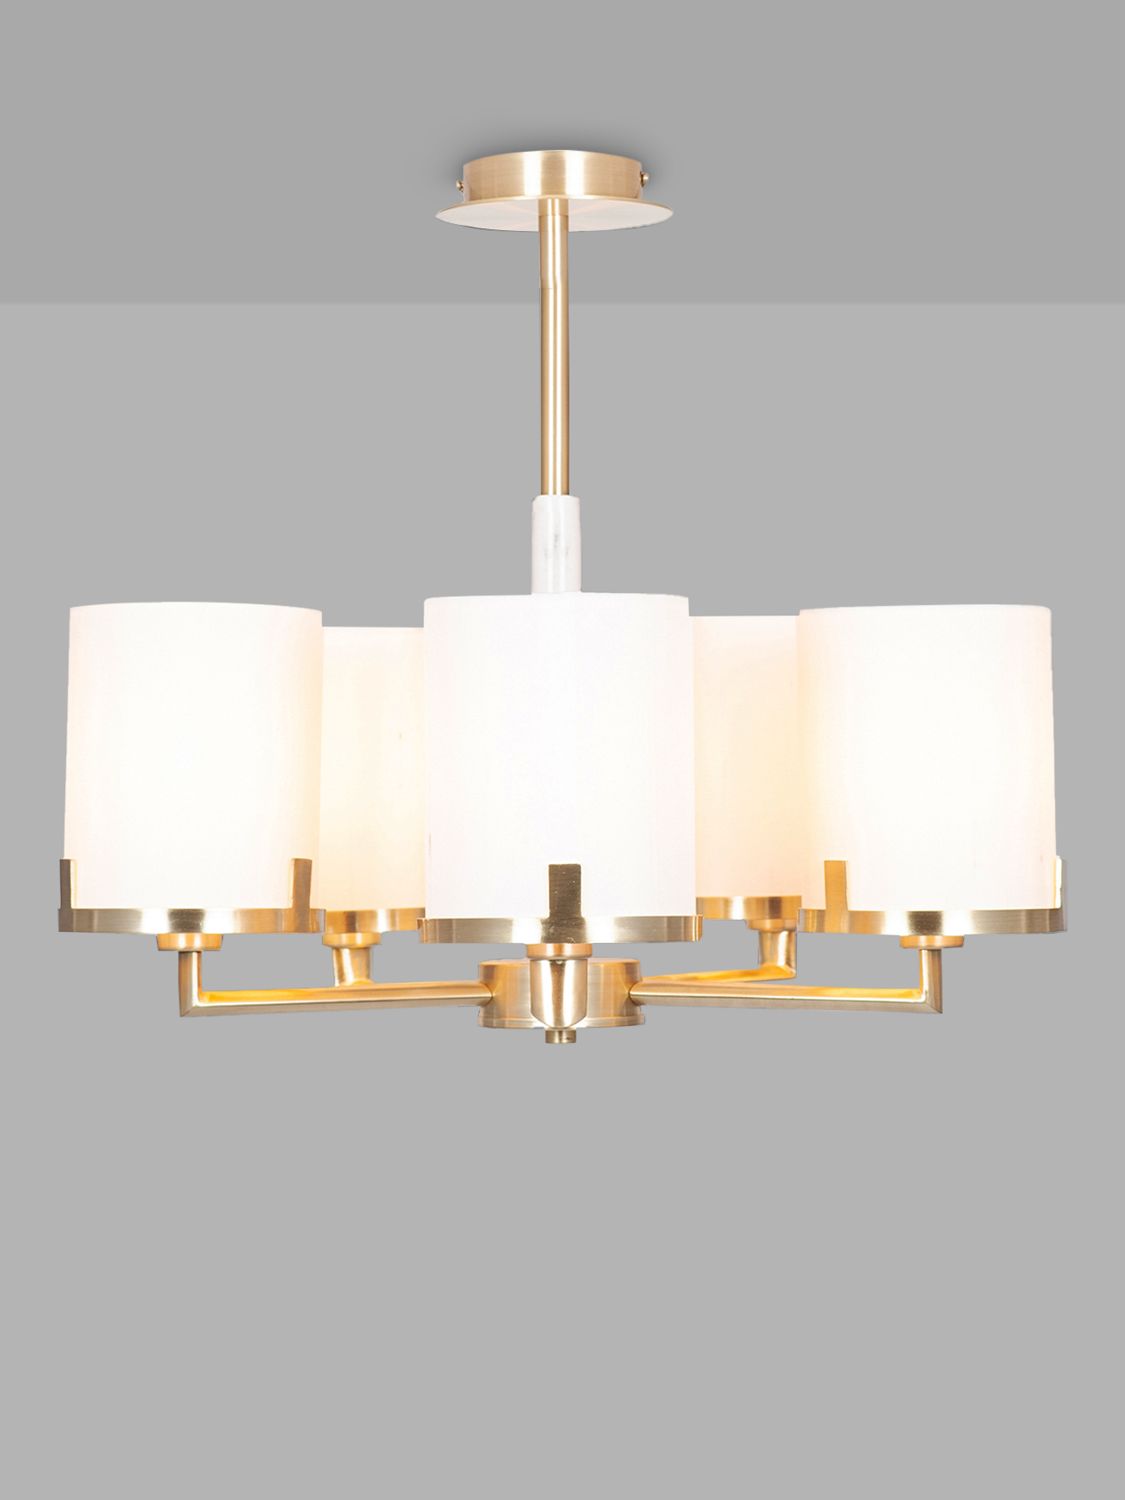 Photo of Pacific lifestyle midland 5 arm ceiling light champagne gold